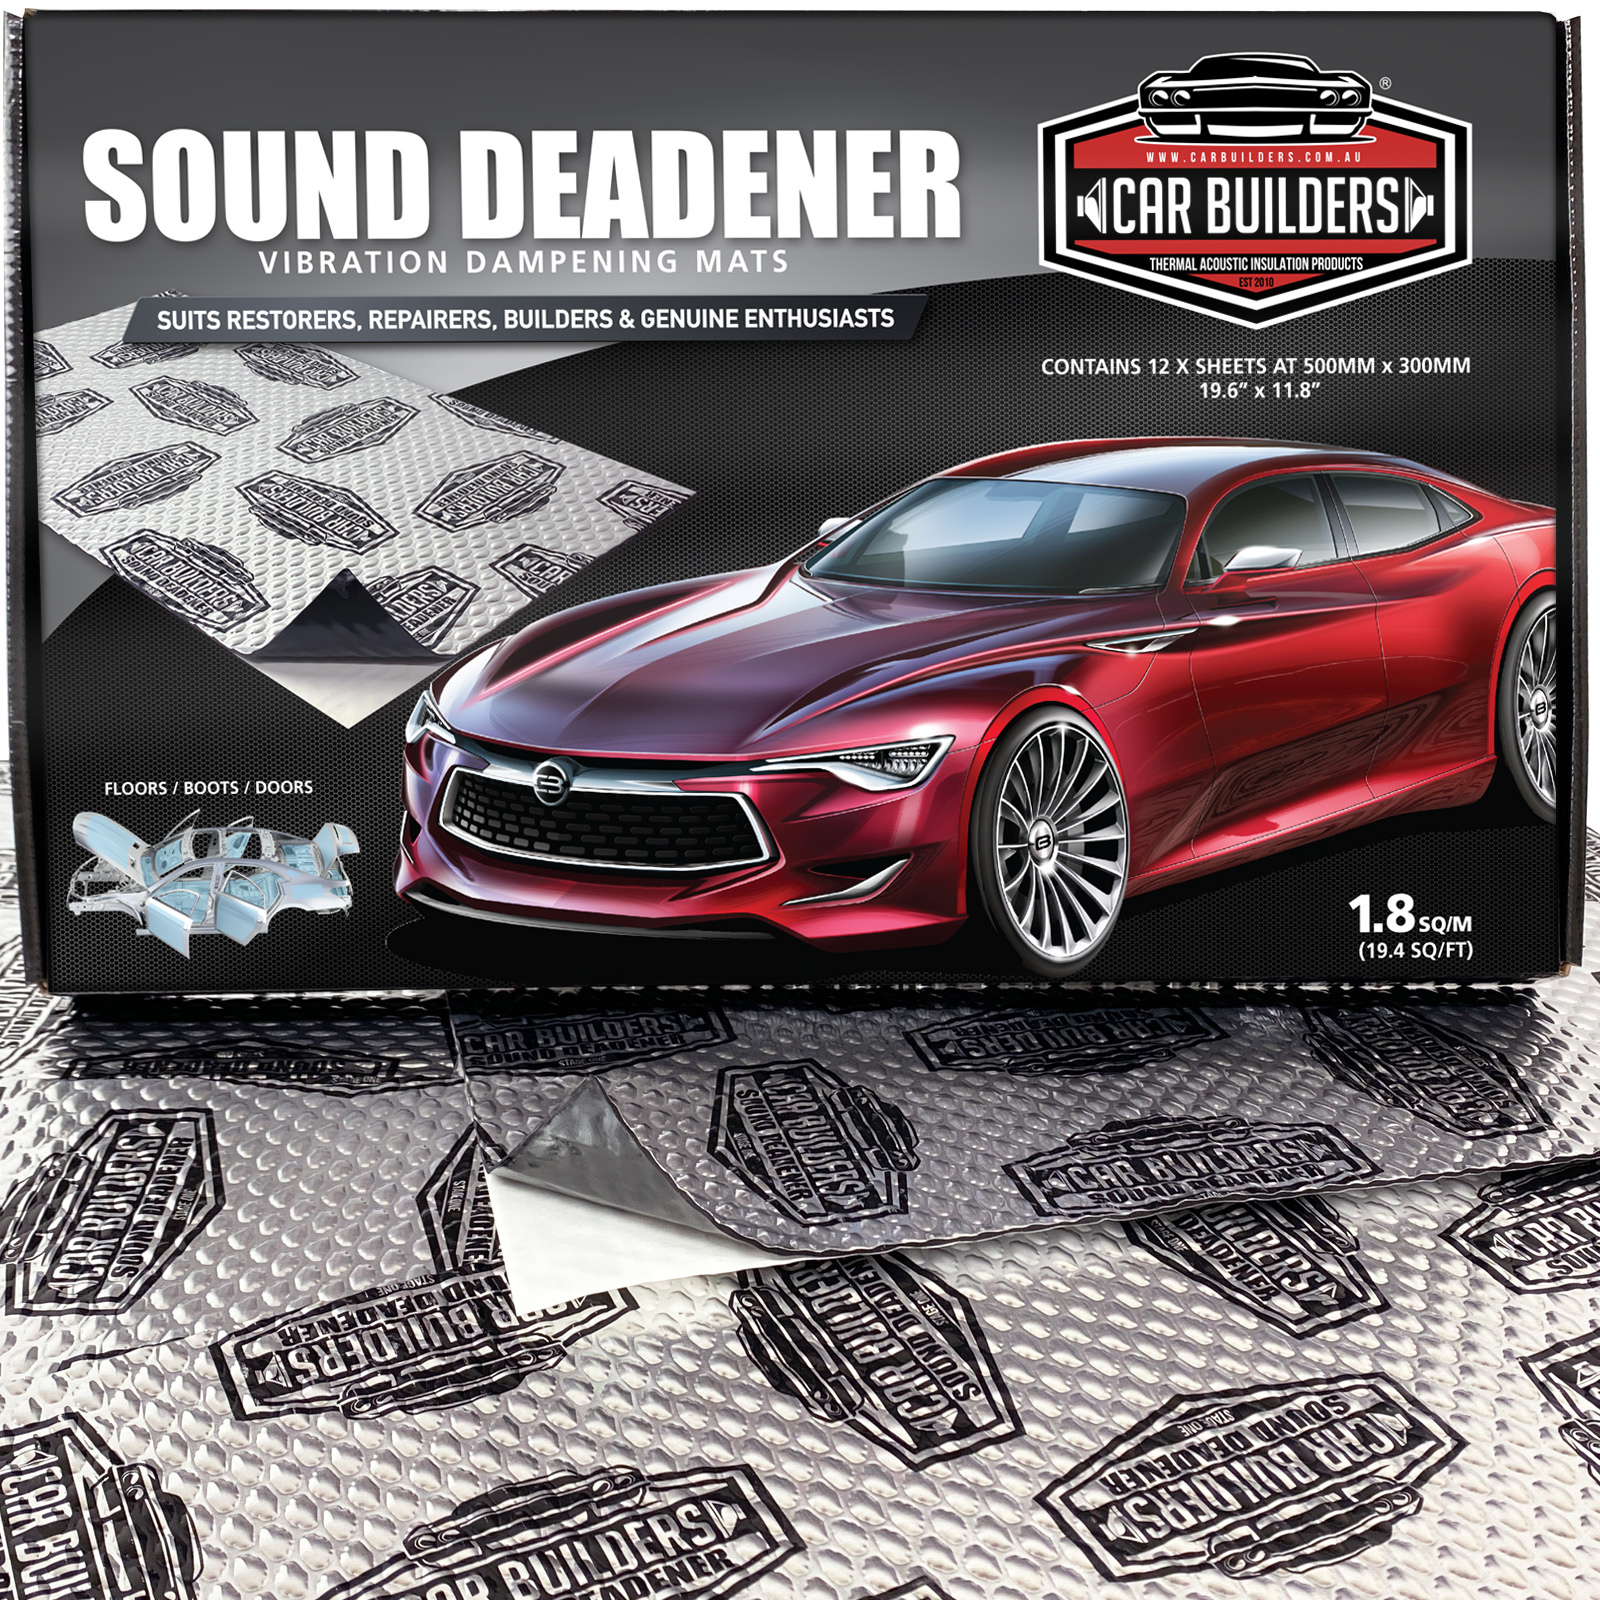 Top 10 Car Soundproofing Products That Actually Work! DIY 